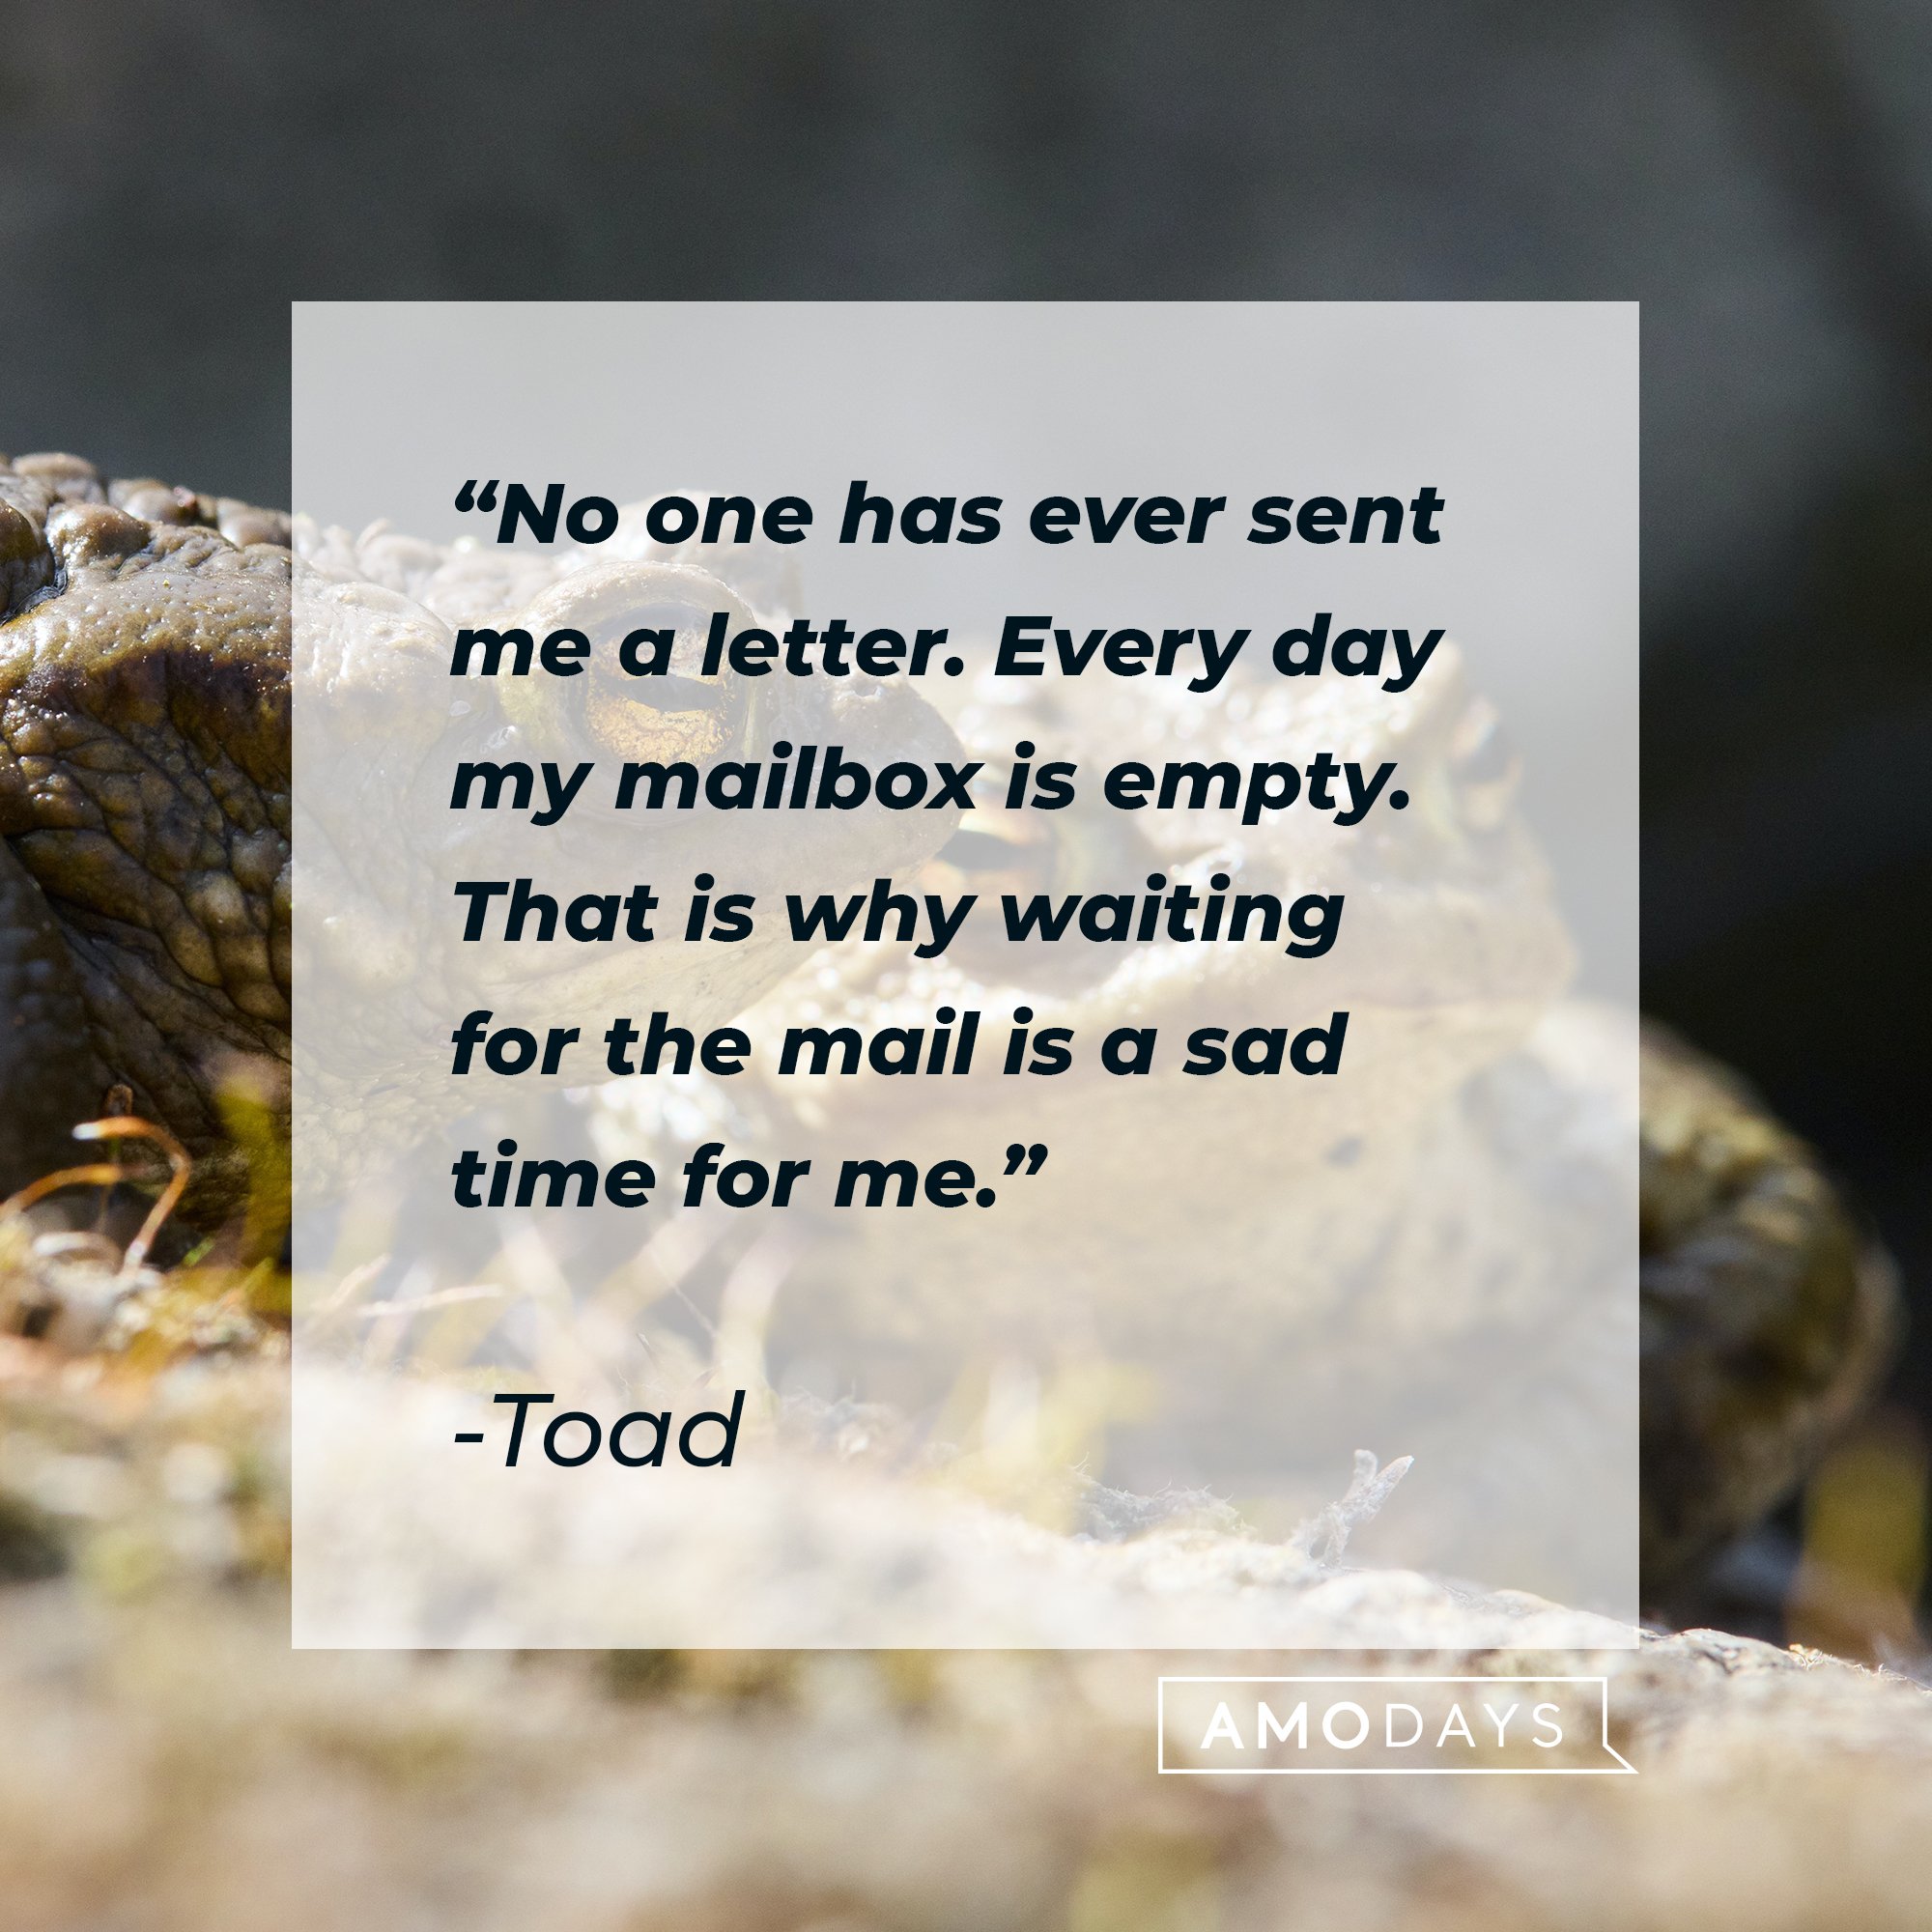 Toad's quote: "No one has ever sent me a letter. Every day my mailbox is empty. That is why waiting for the mail is a sad time for me." | Image: AmoDays